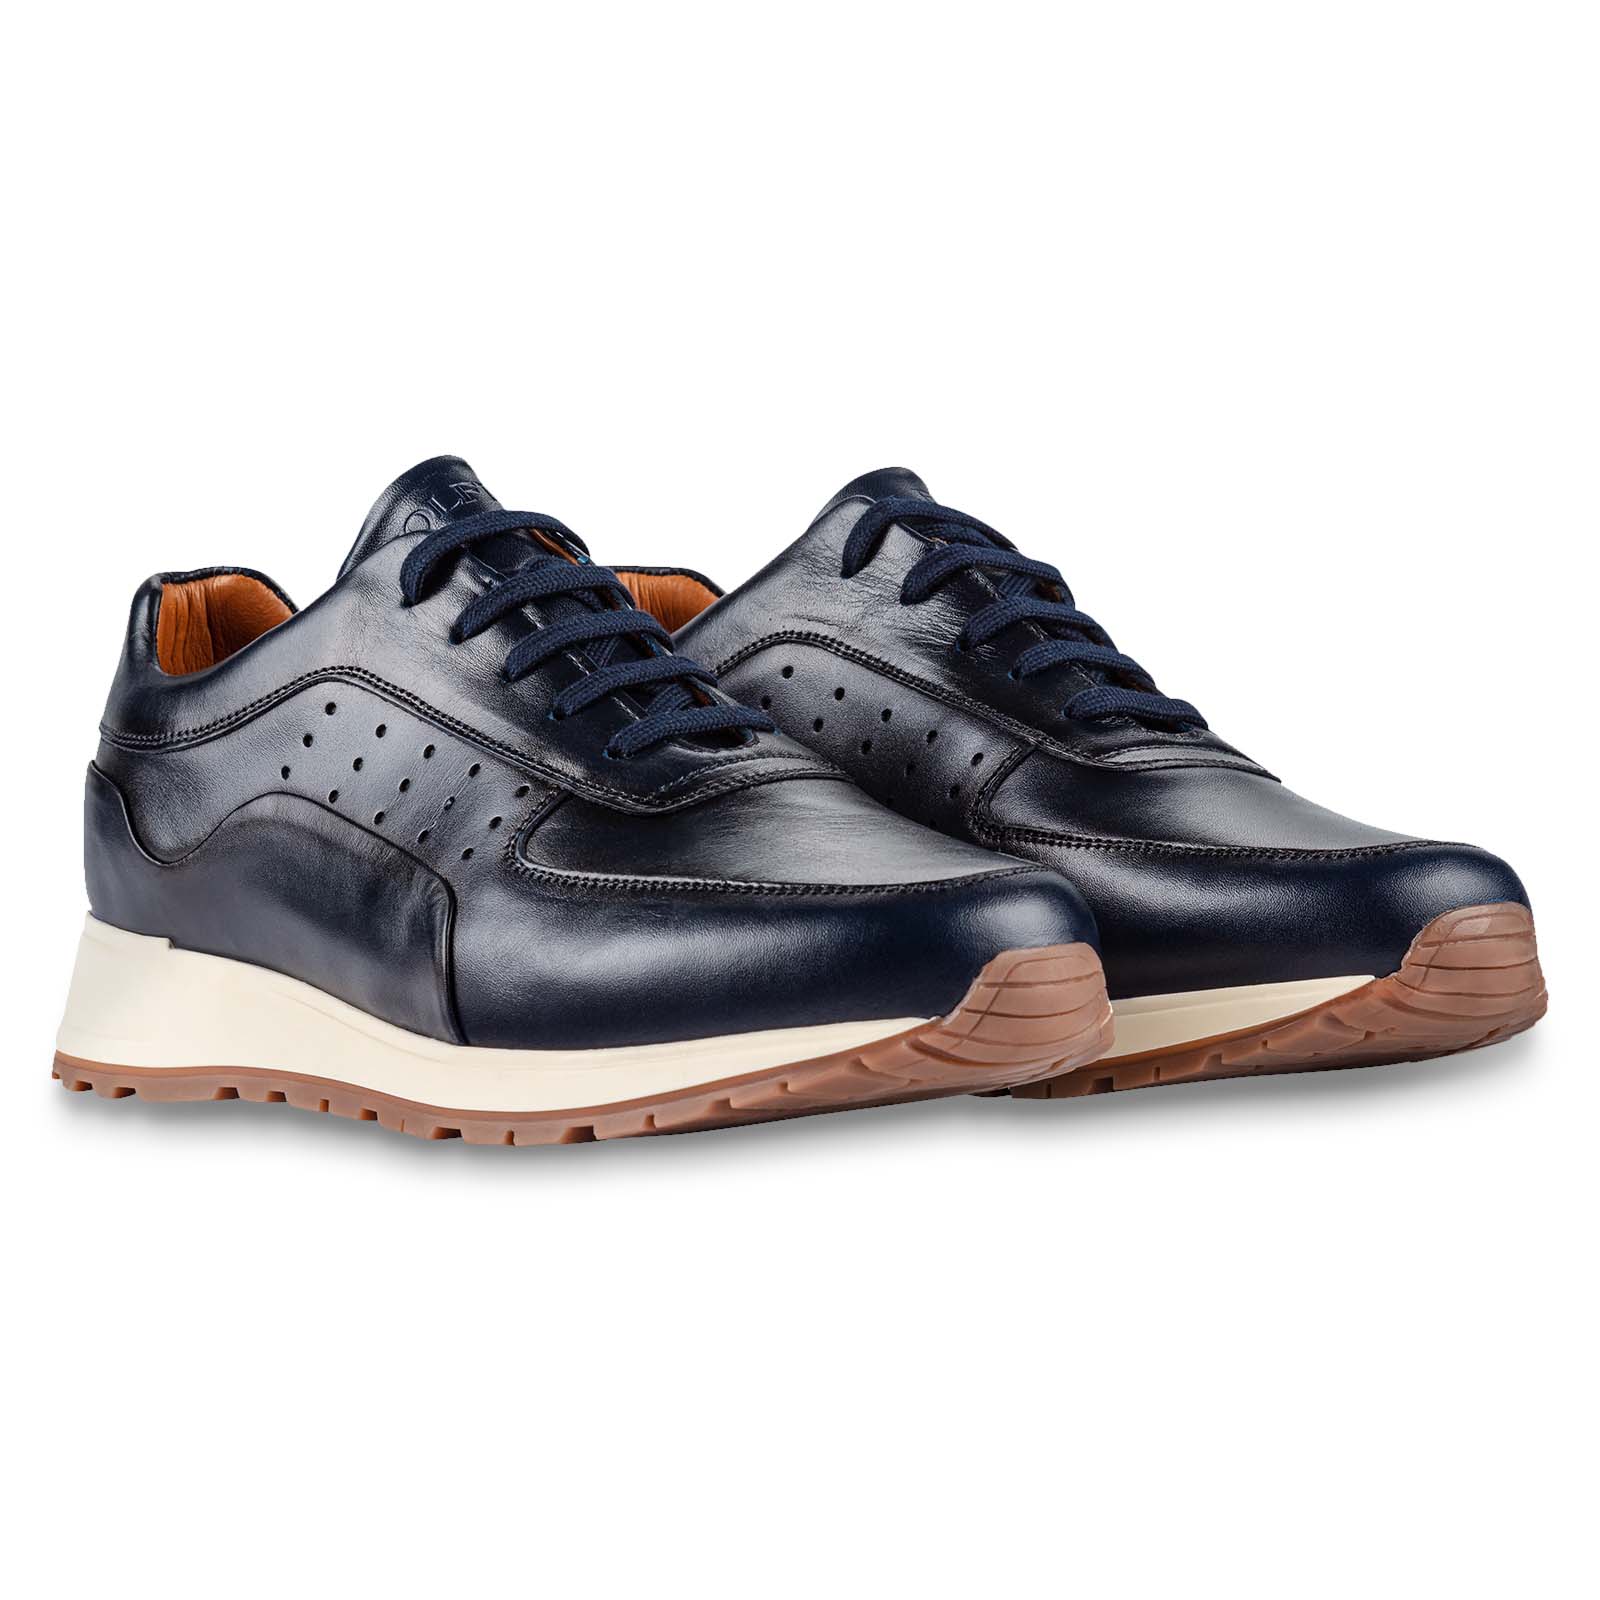 Men's golf shoes with a sporty touch